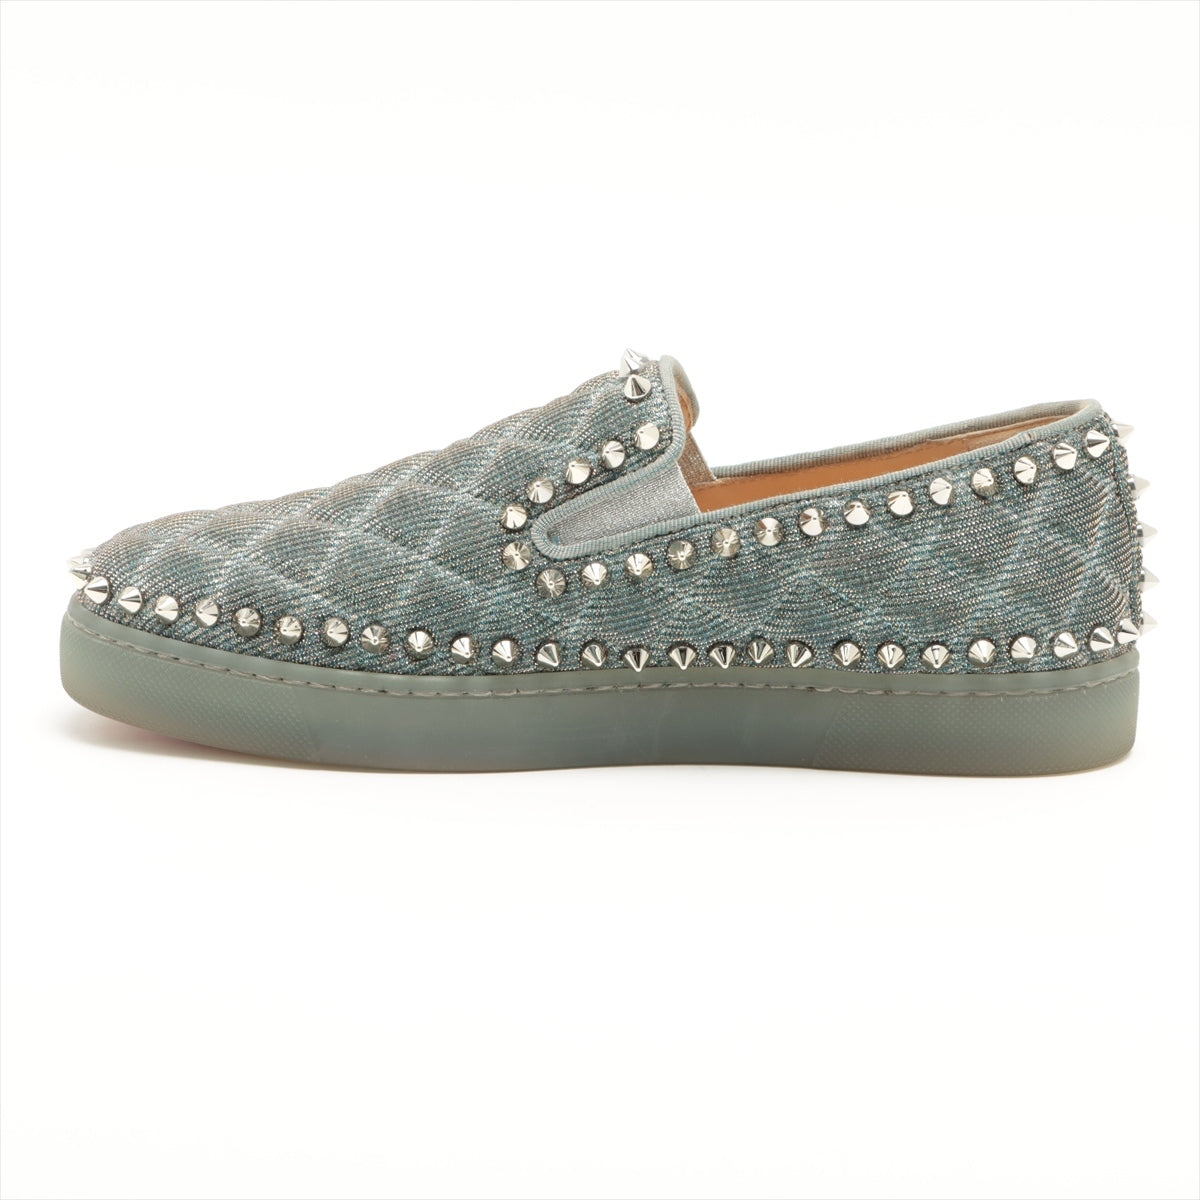 Christian Louboutin pick boat Fabric Slip-on 35 1/2 Ladies' Blue There is a stud thread